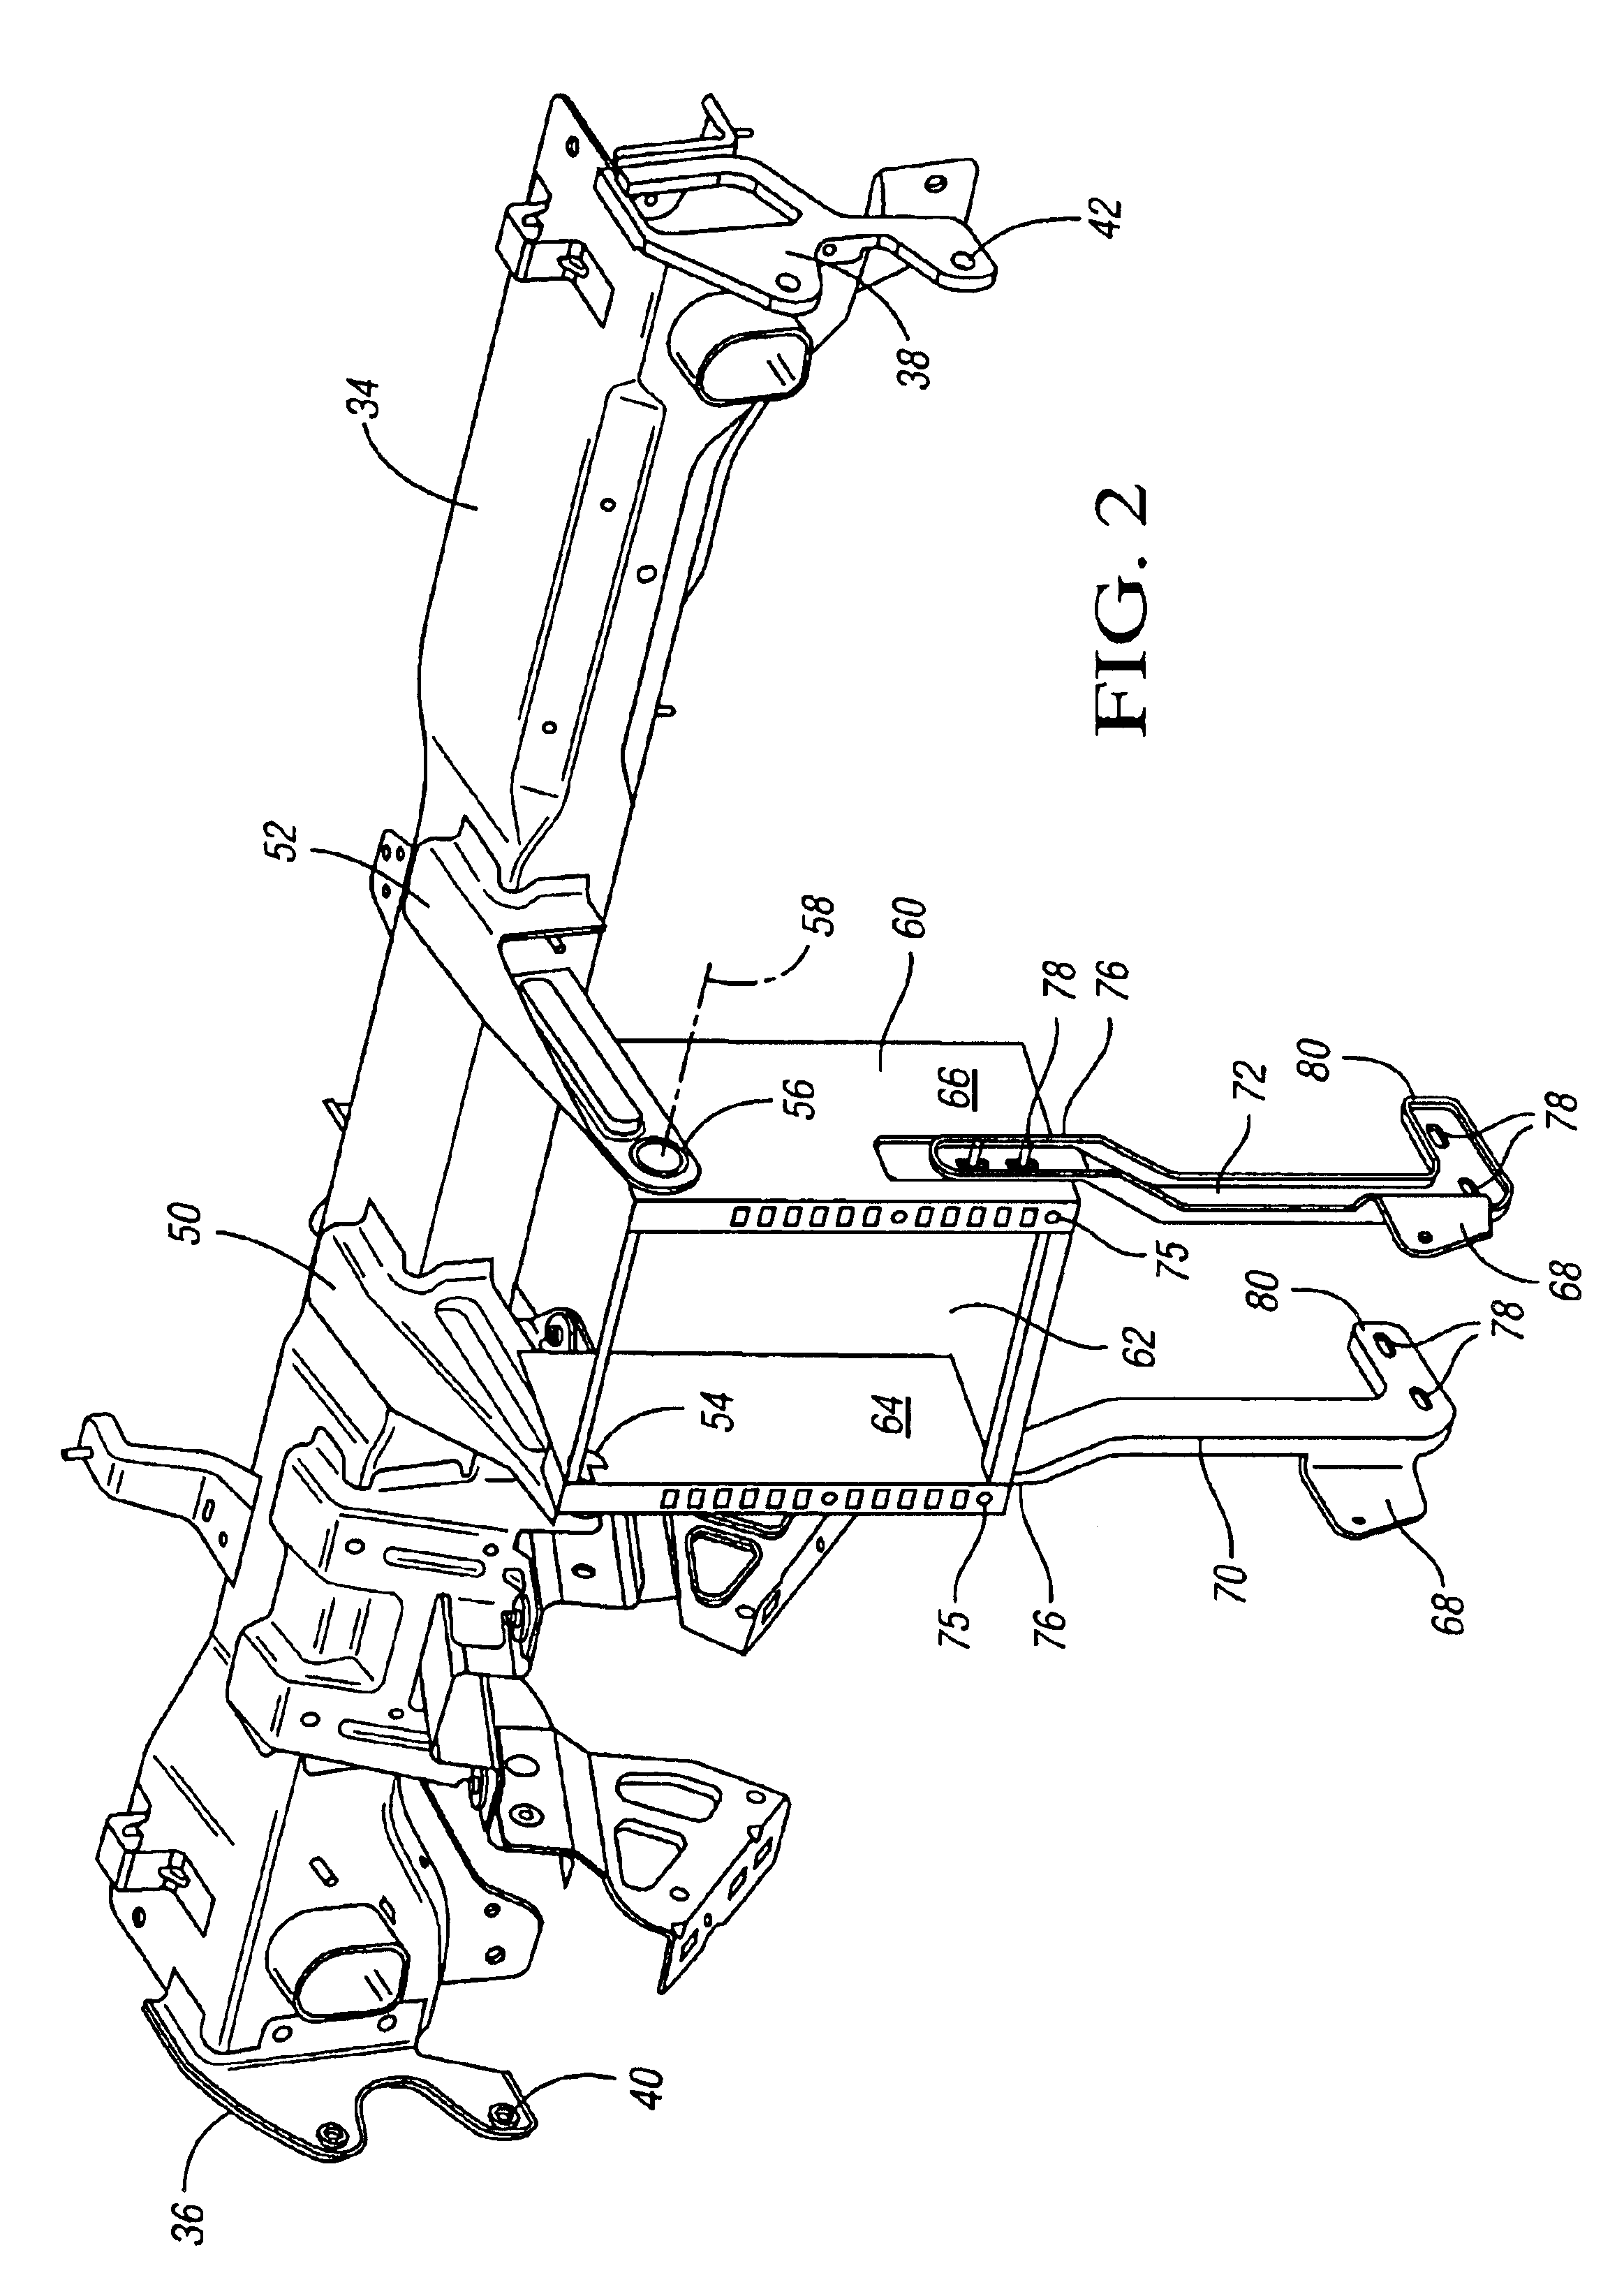 Pivoting instrument panel central stack structure and method for flow-through instrument panel console interface